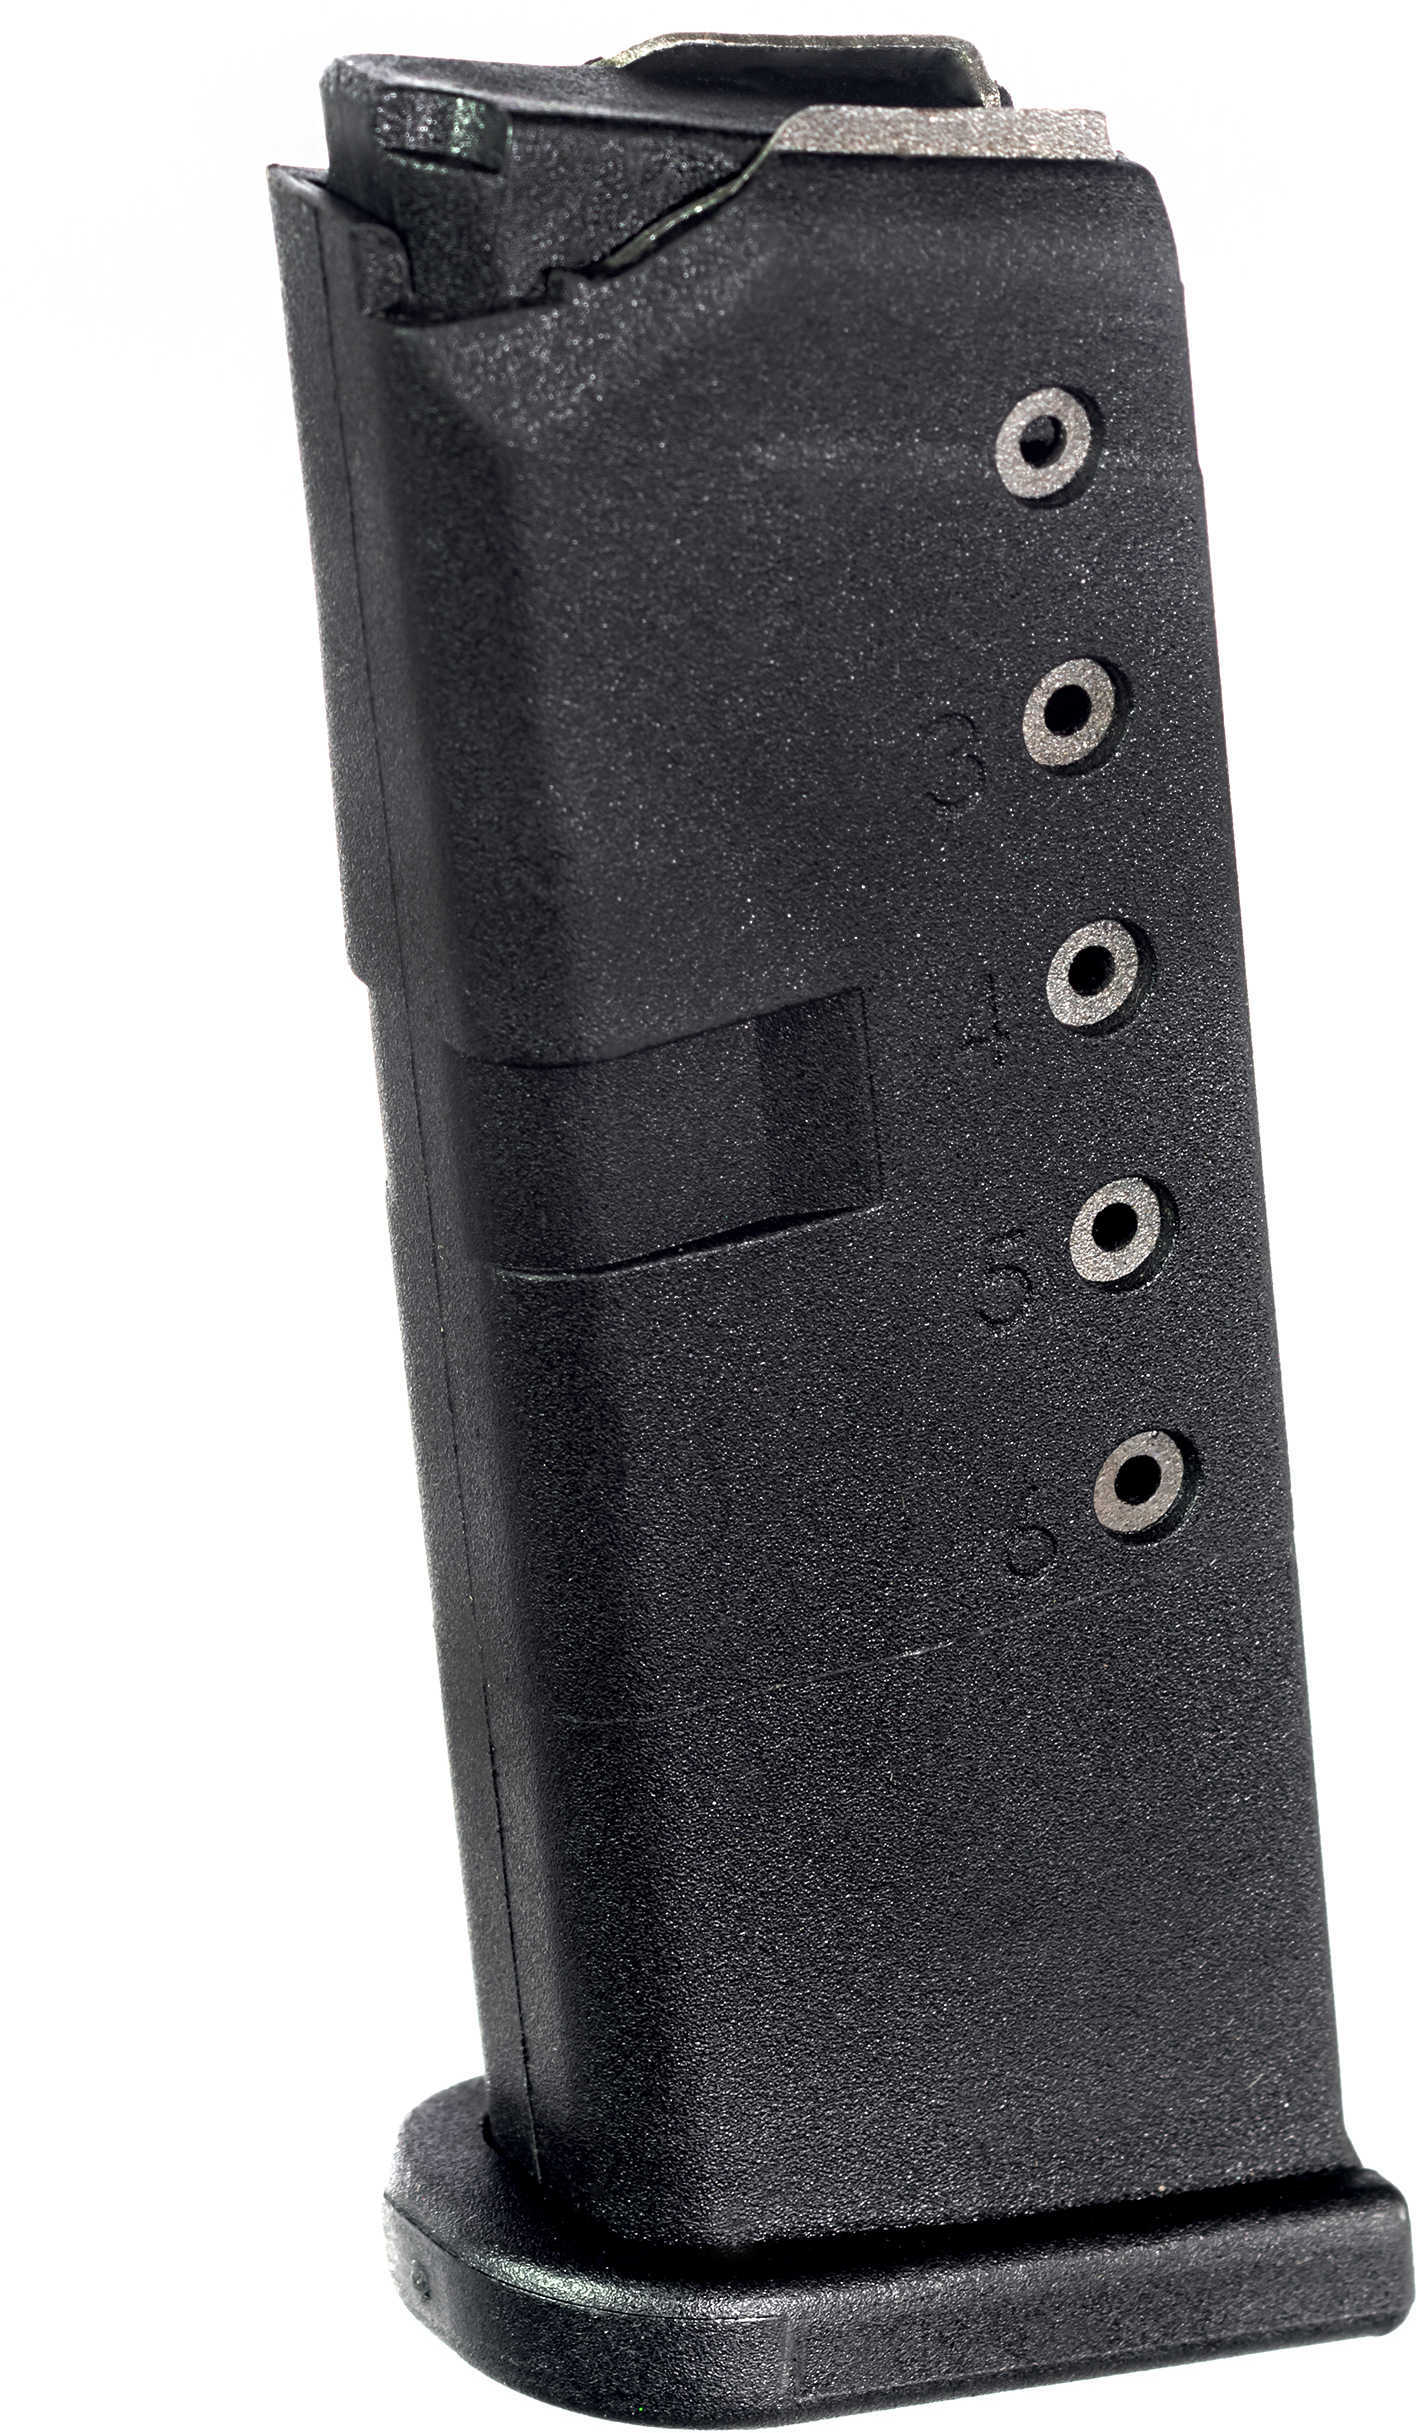 PROMAG for Glock 42 380 ACP 6RD BLK POLY